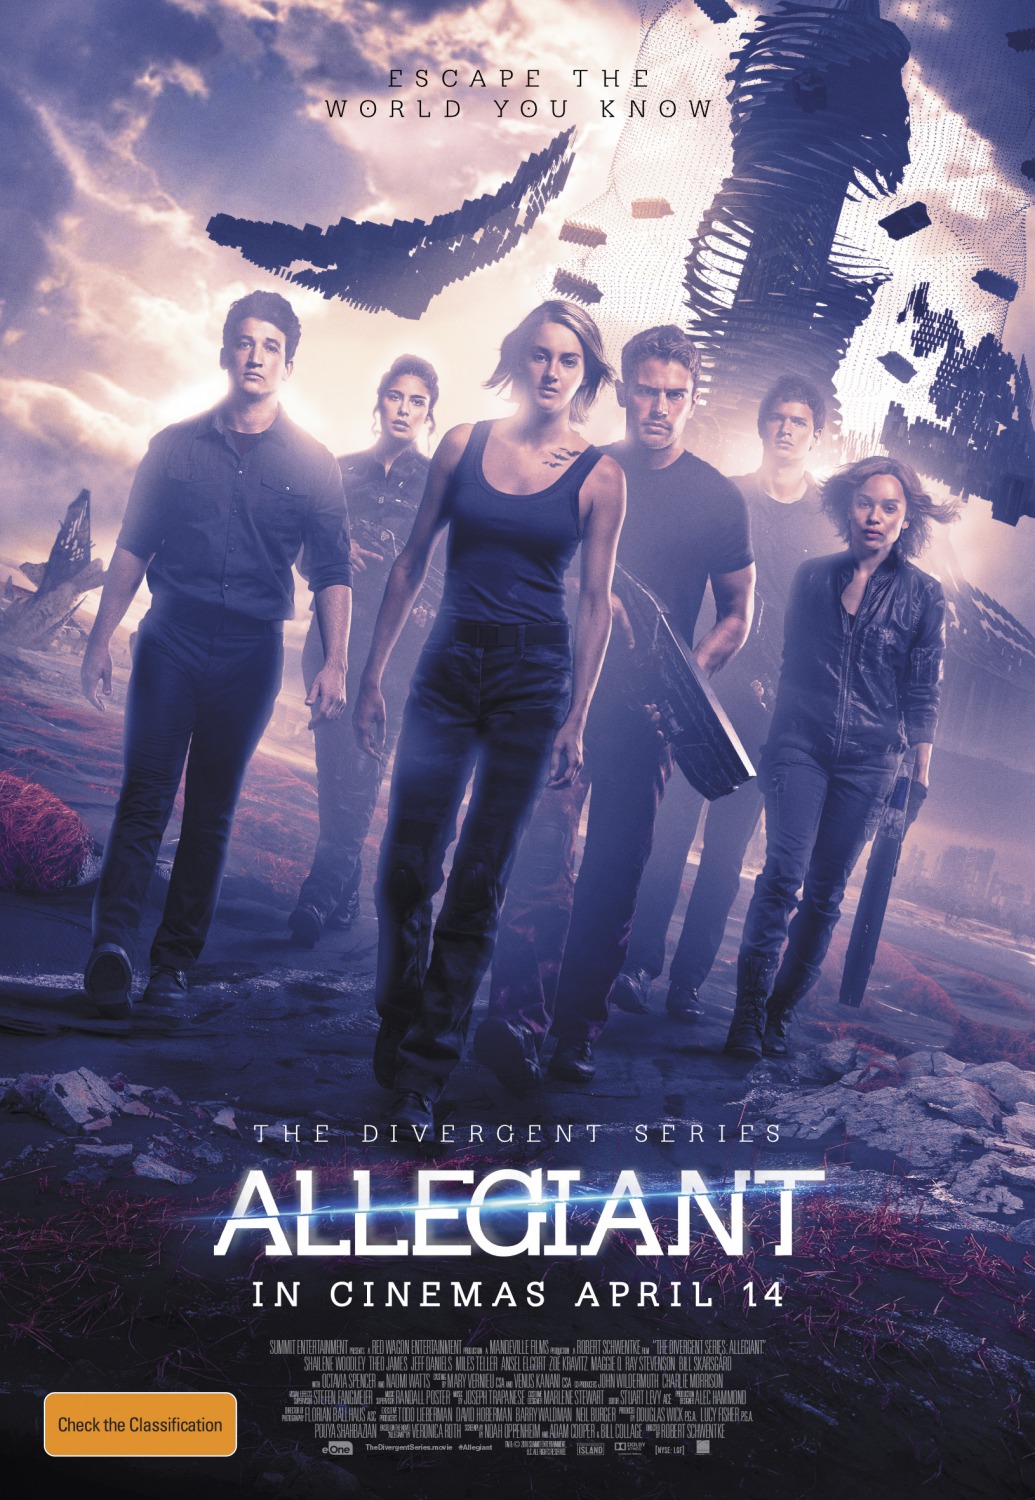 The Divergent Series: Allegiant (#17 of 20): Extra Large Movie Poster